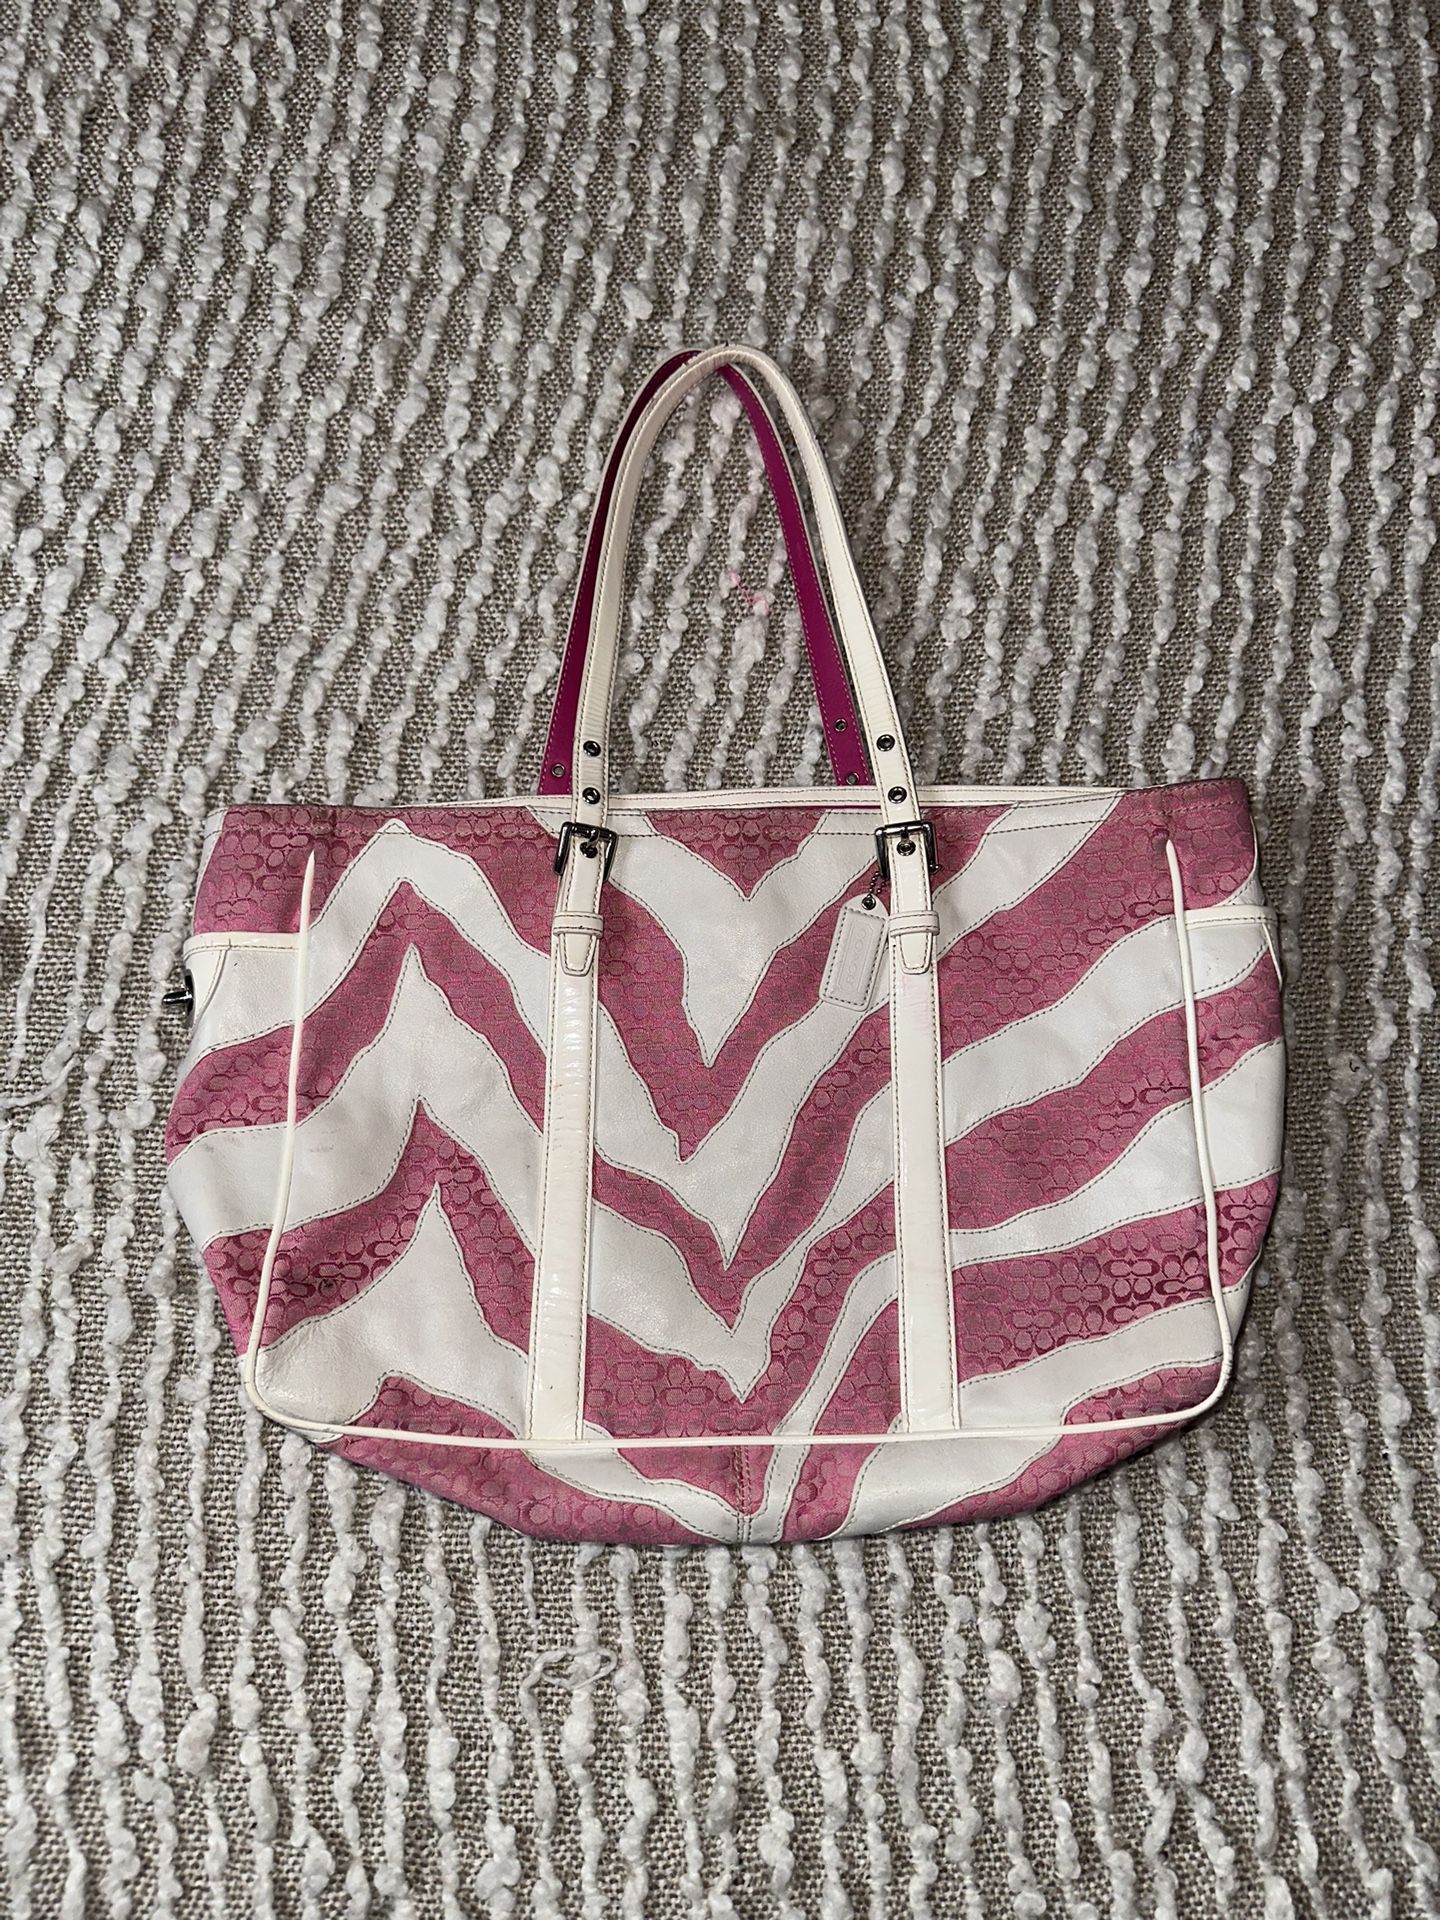 Coach limited edition pink and white zebra patchwork large gallery multi tote bag satchel